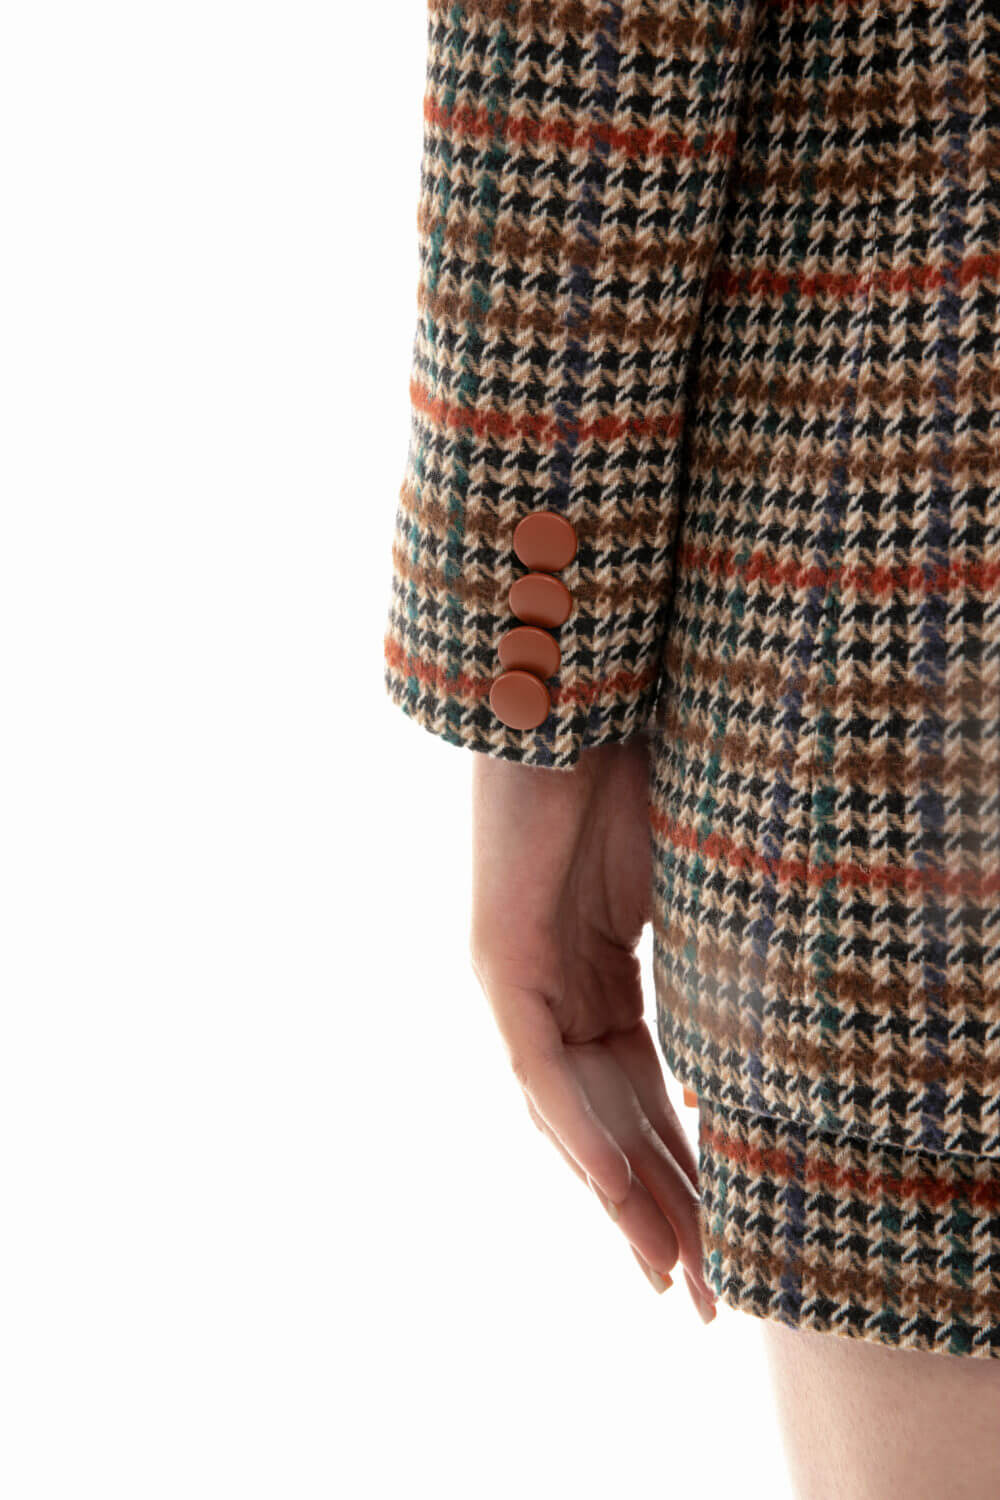 Tweed Houndstooth Jacket With Leather